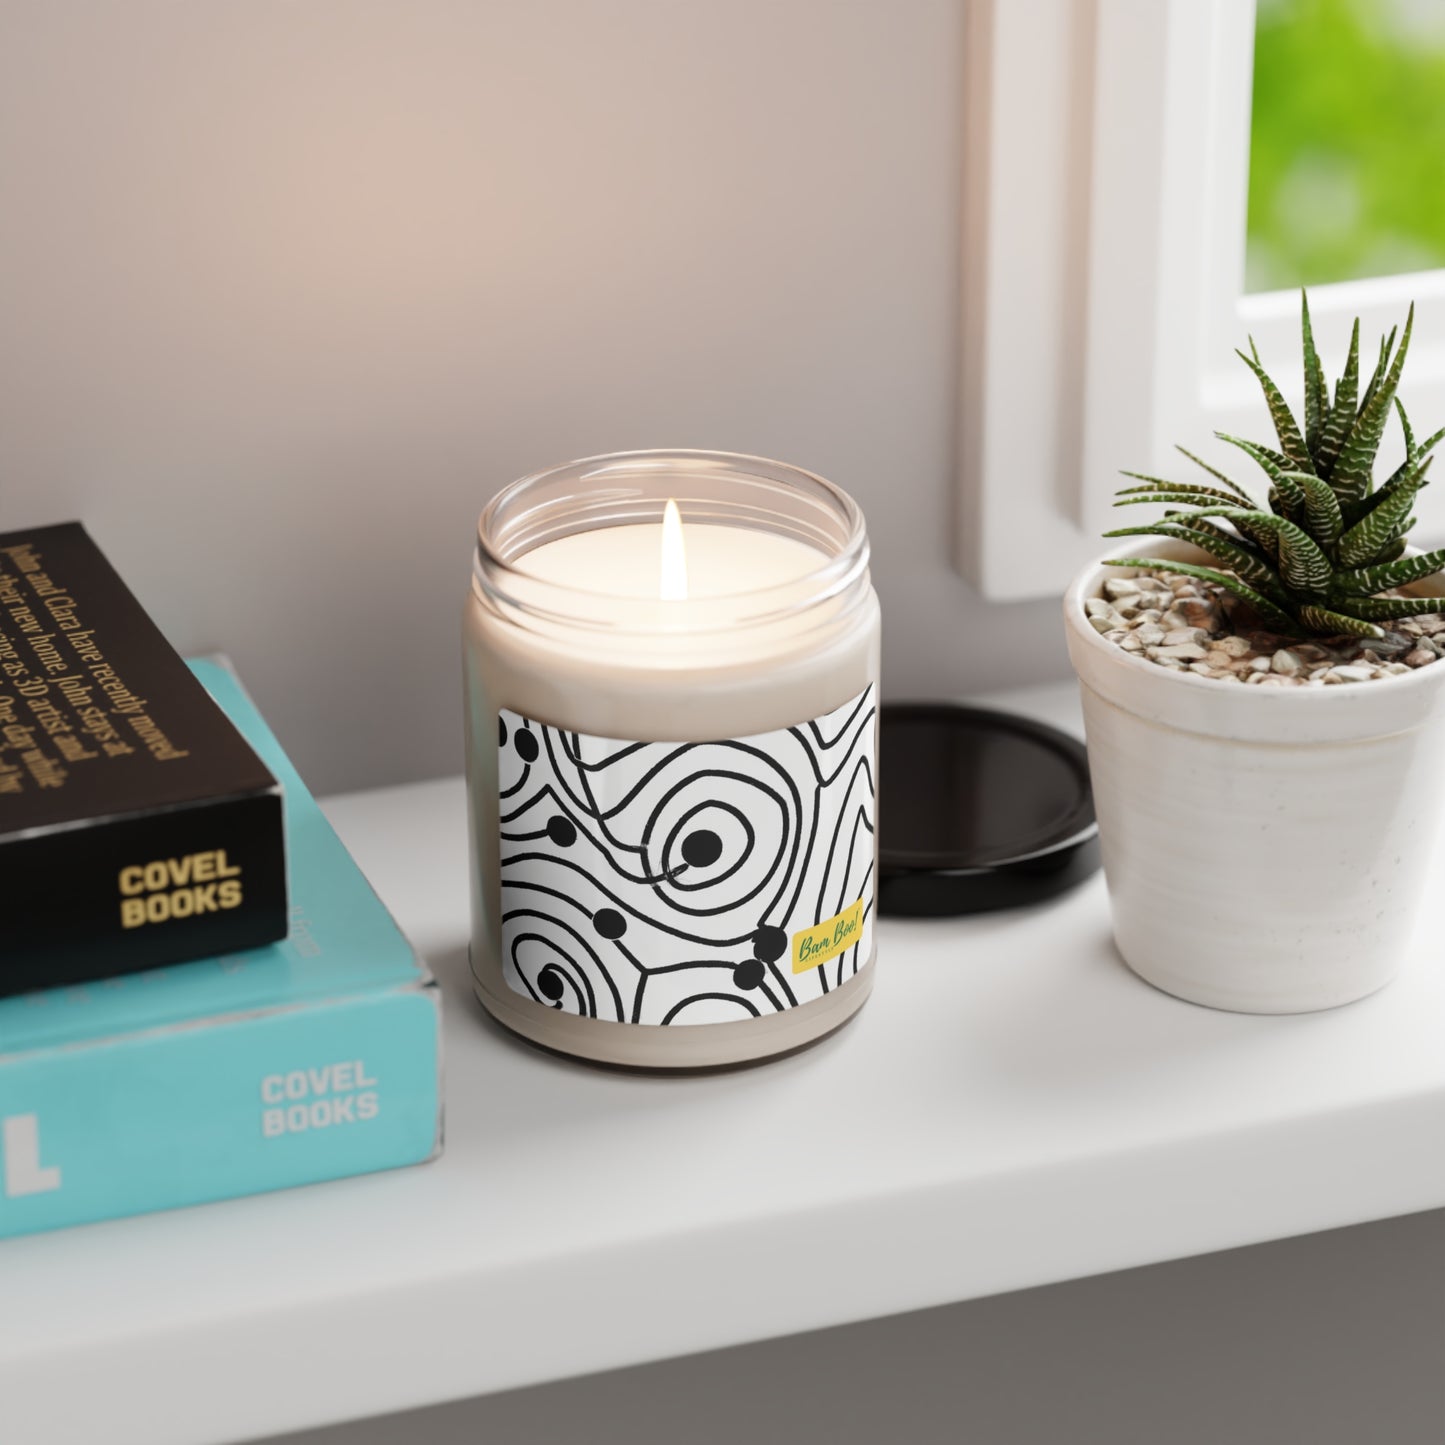 "Monochromatic Artistry: Exploring Variations in a Single Color" - Bam Boo! Lifestyle Eco-friendly Soy Candle